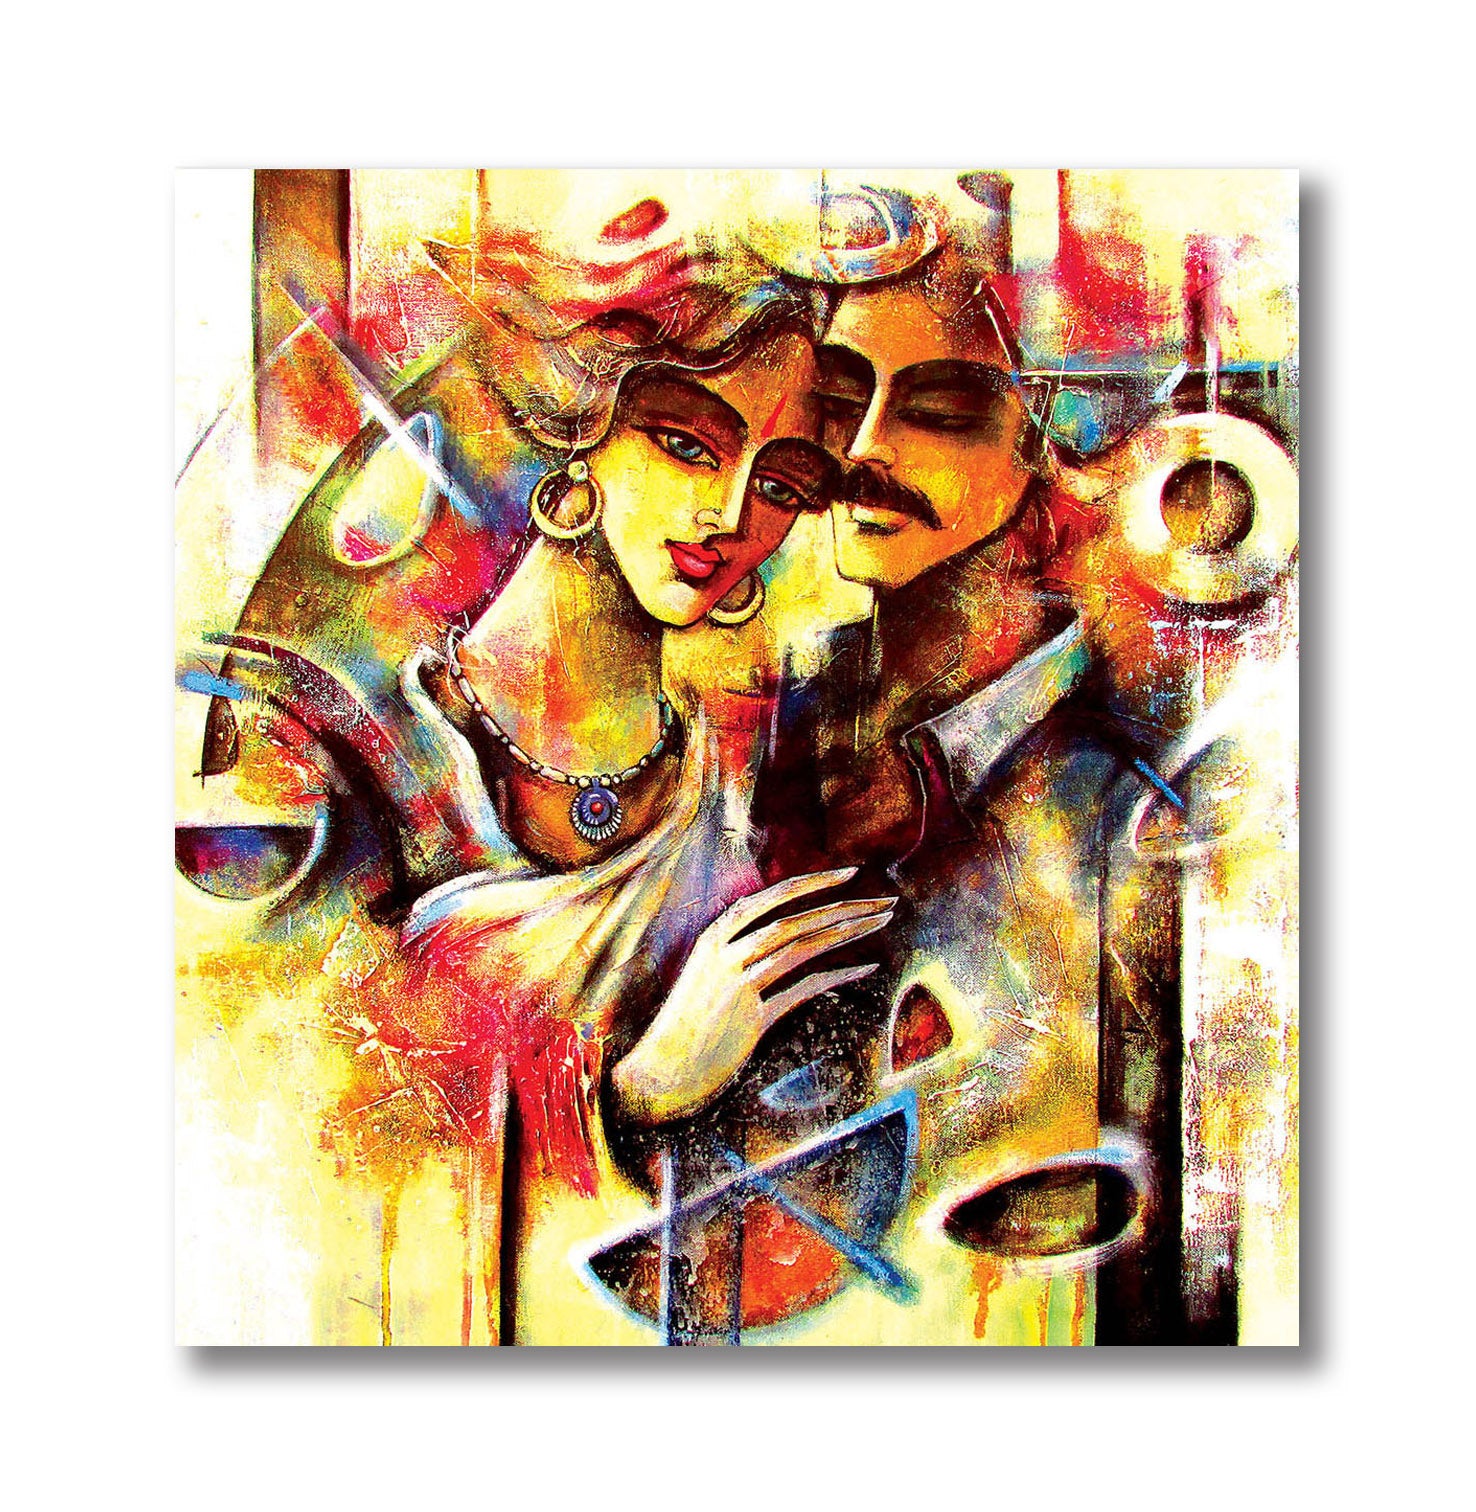 In Love - Unframed Canvas Painting